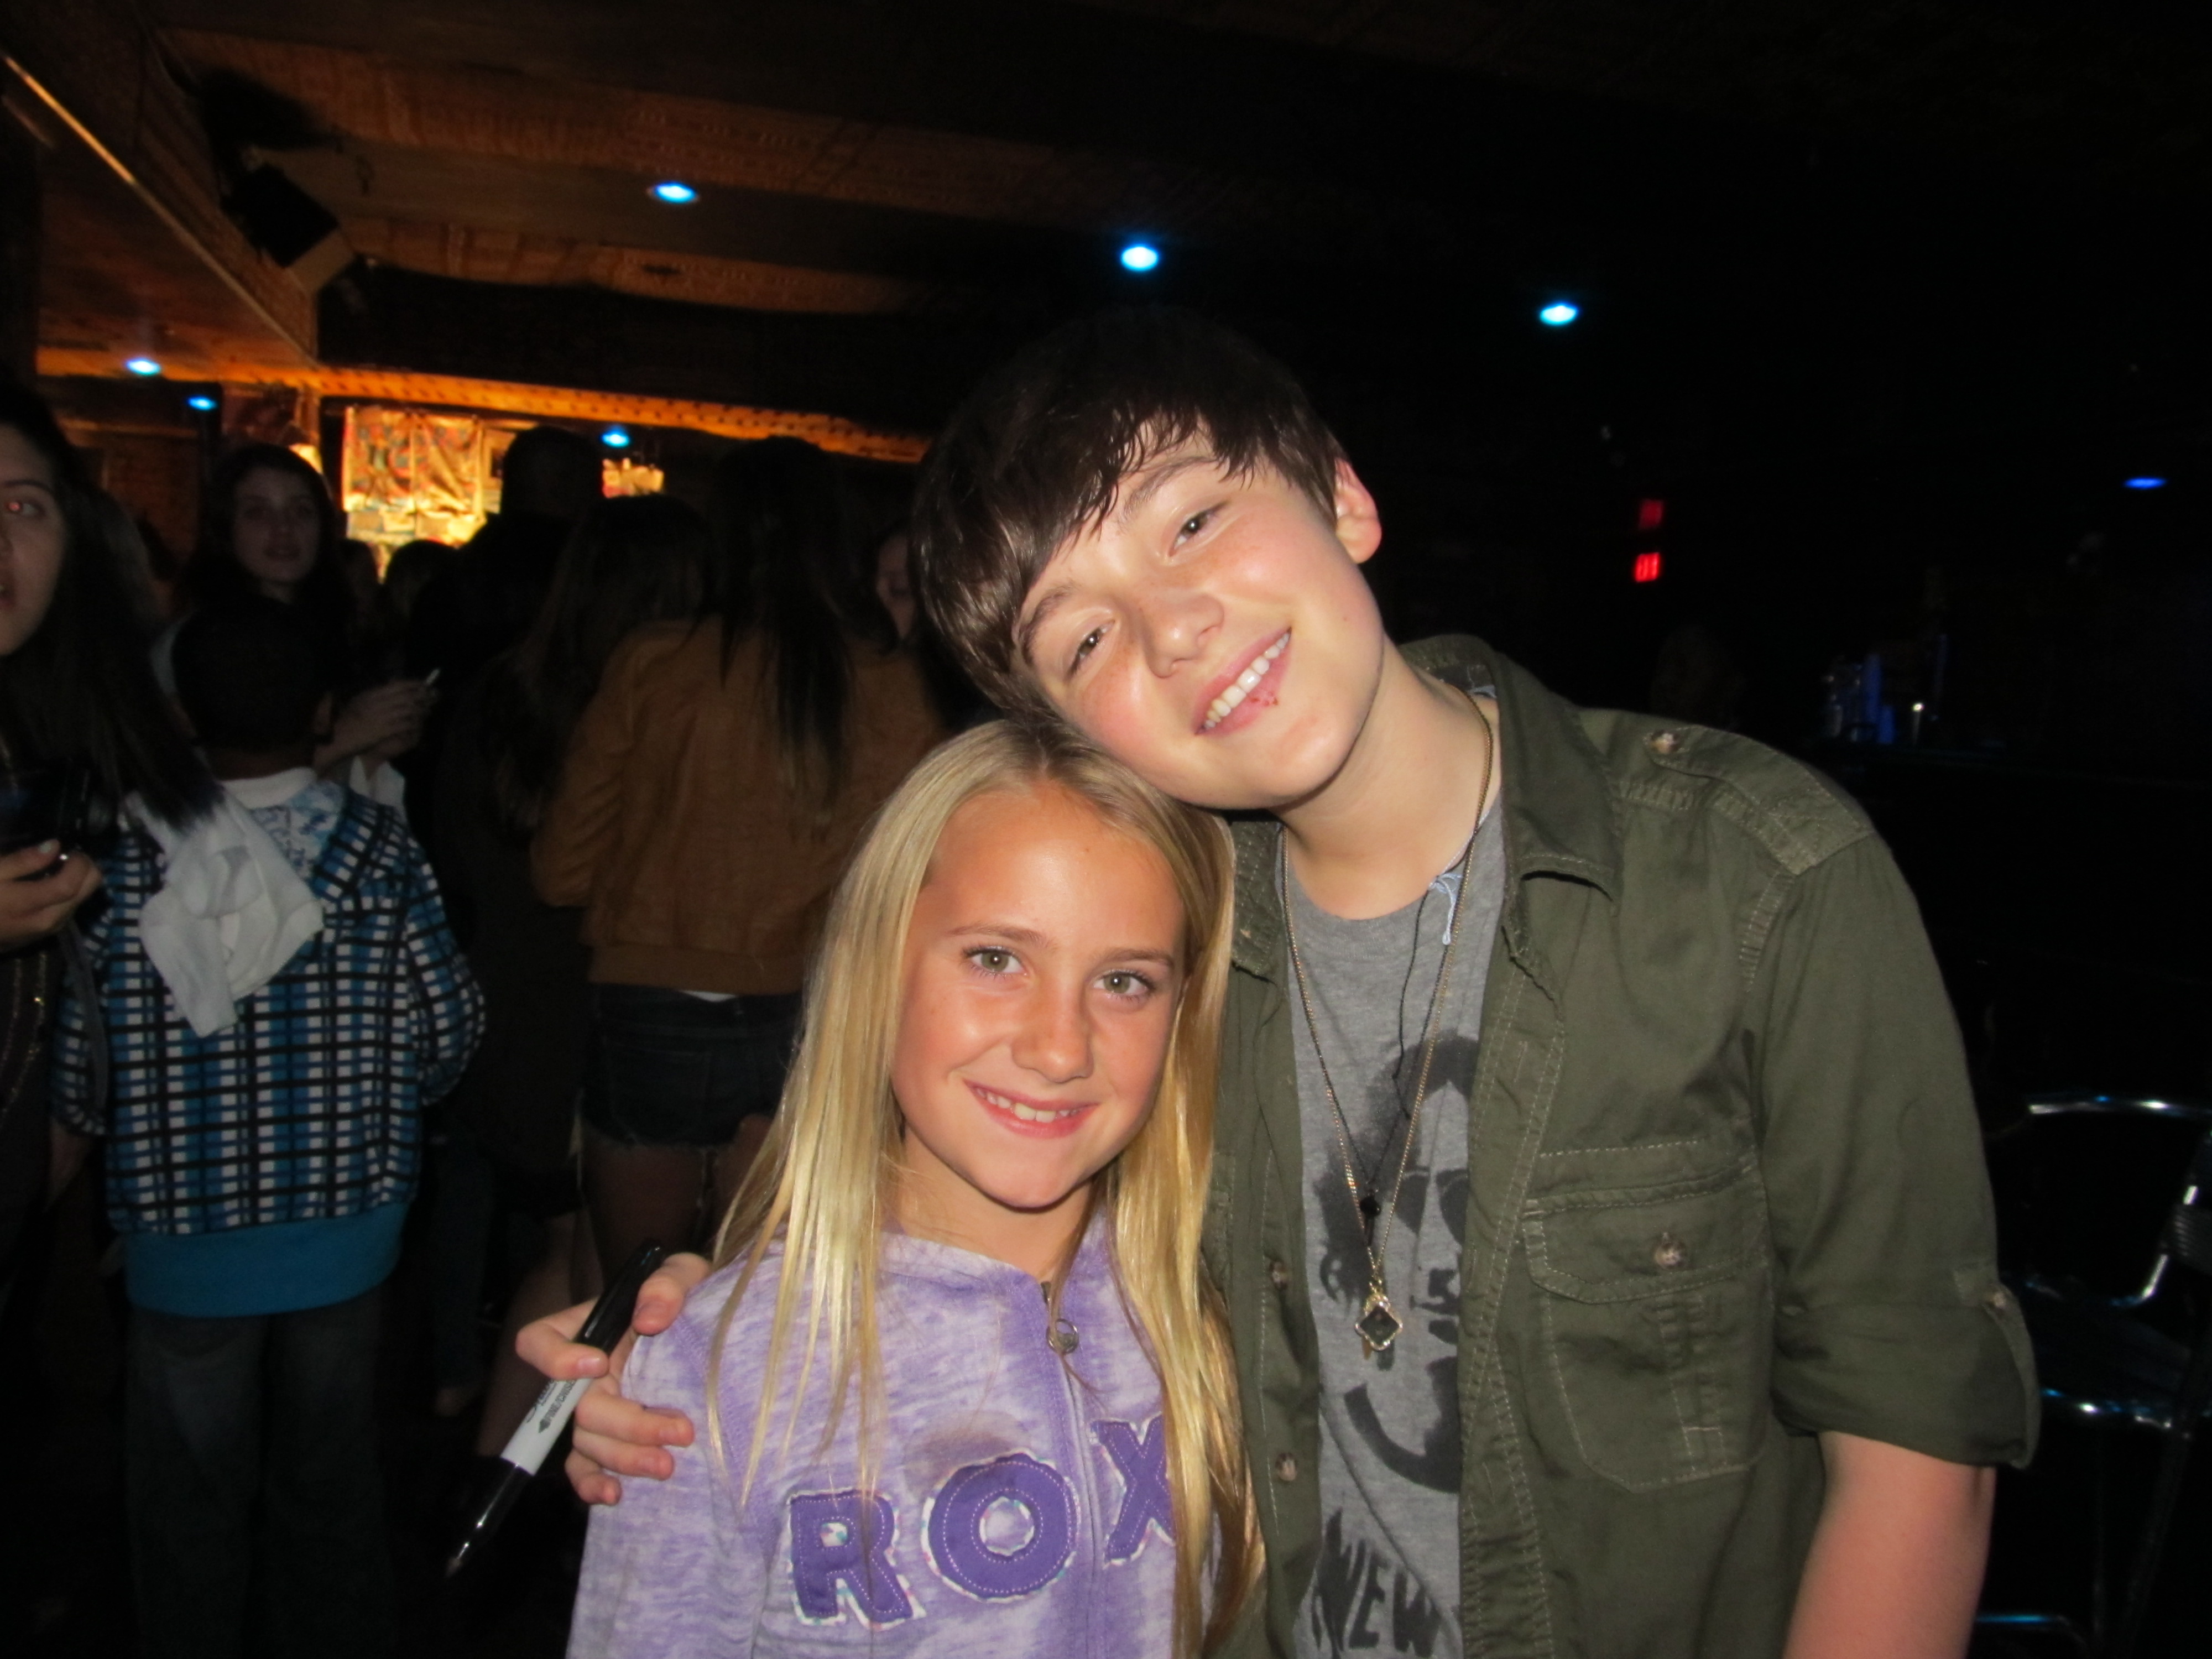 Samantha with Greyson Chance after his concert. She was recently in his music video.